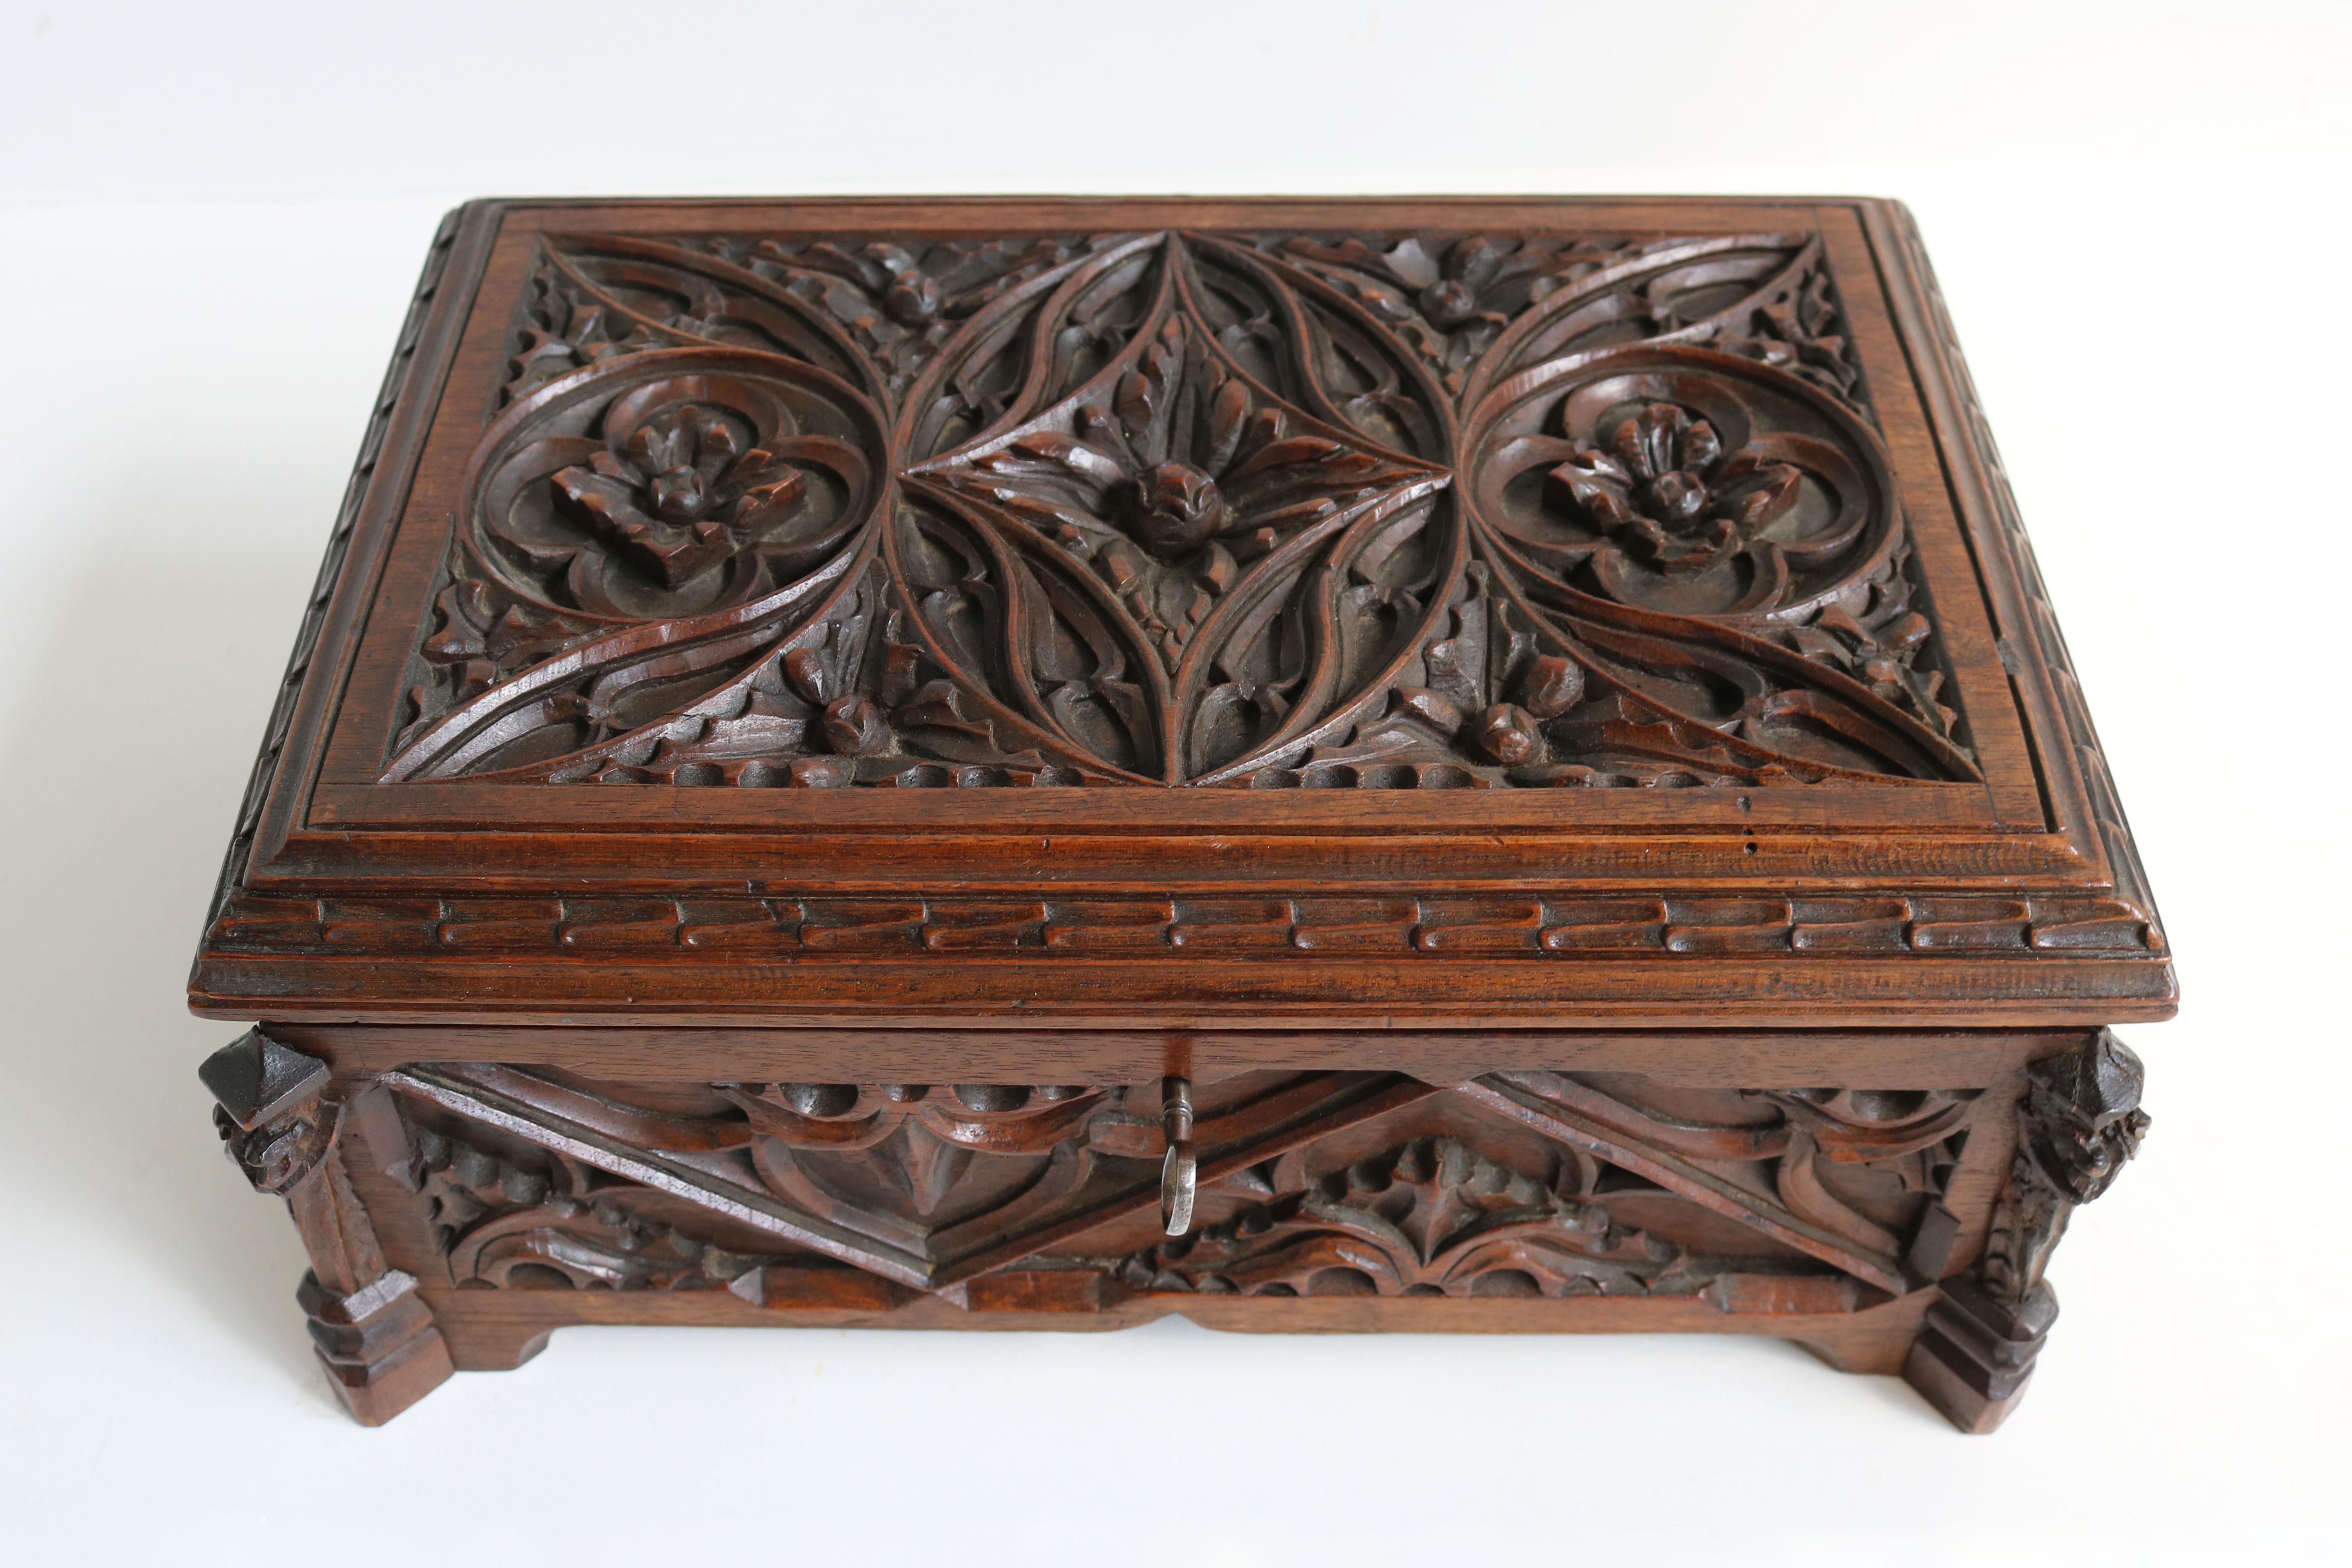 Exquisite & rare ! This French 19th century Gothic Revival Jewelry box in carved walnut. 
Amazing craftsmanship and richly decorated with Gothic style carvings on all sides. 
Each corner has a church pillar typical for the gothic style & the piece